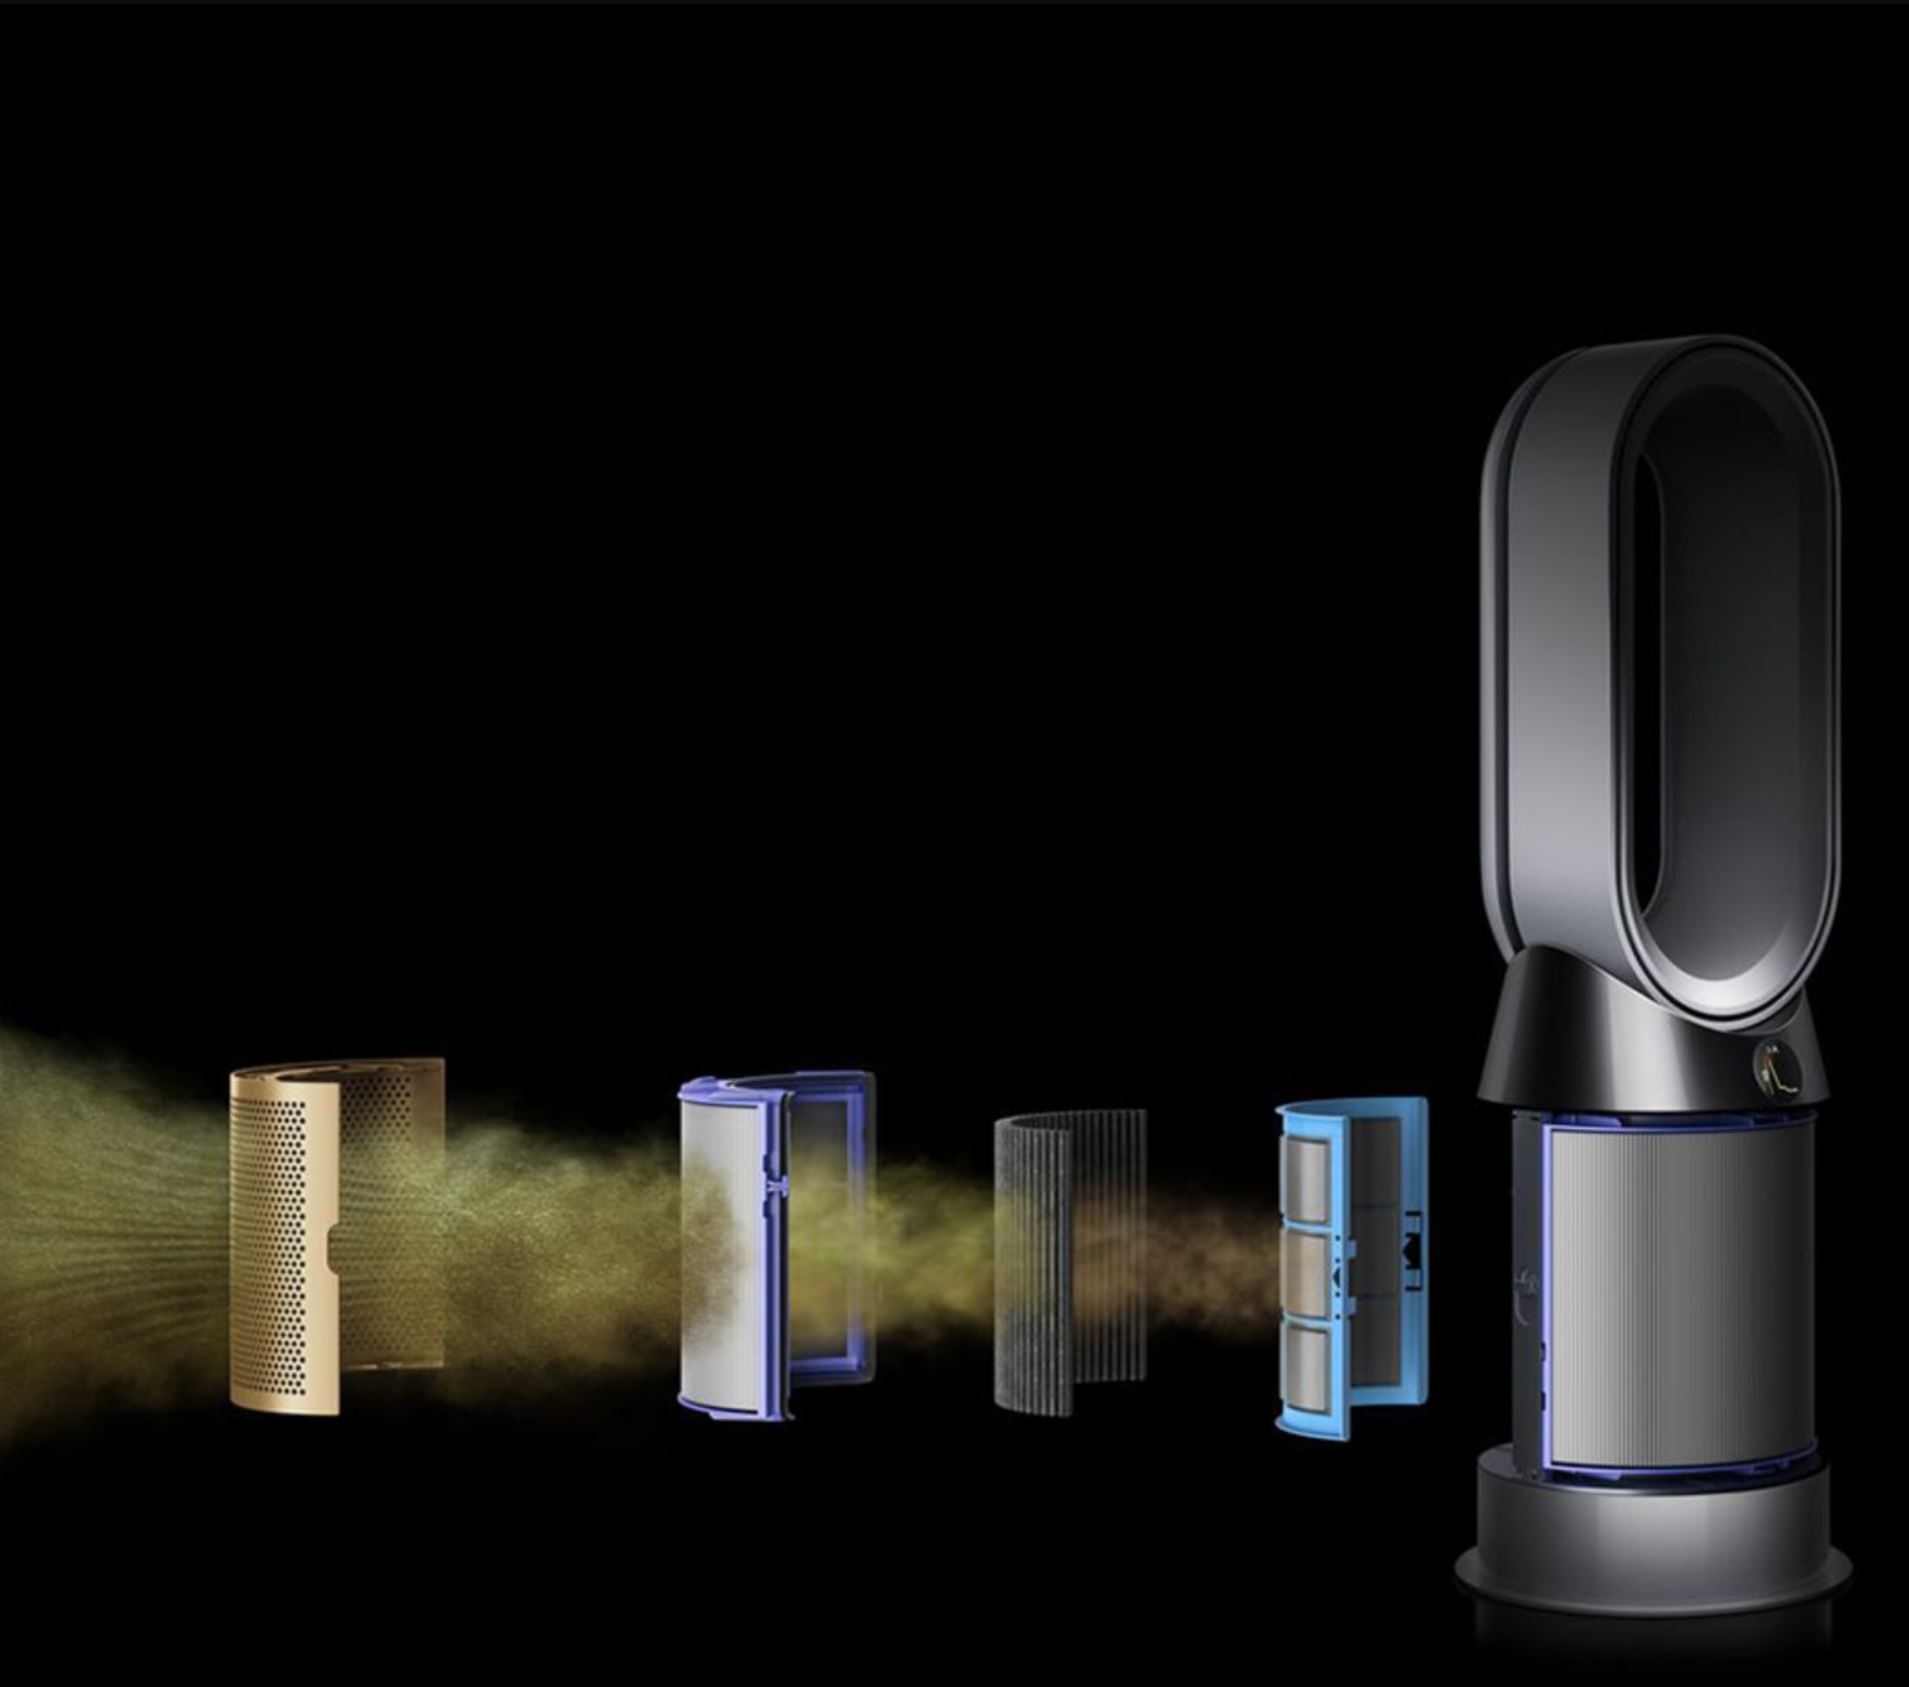 Kalmte Verrast zijn Het formulier Dyson Pure Hot+Cool Cryptomic review: altijd zuivere lucht - ITdaily.